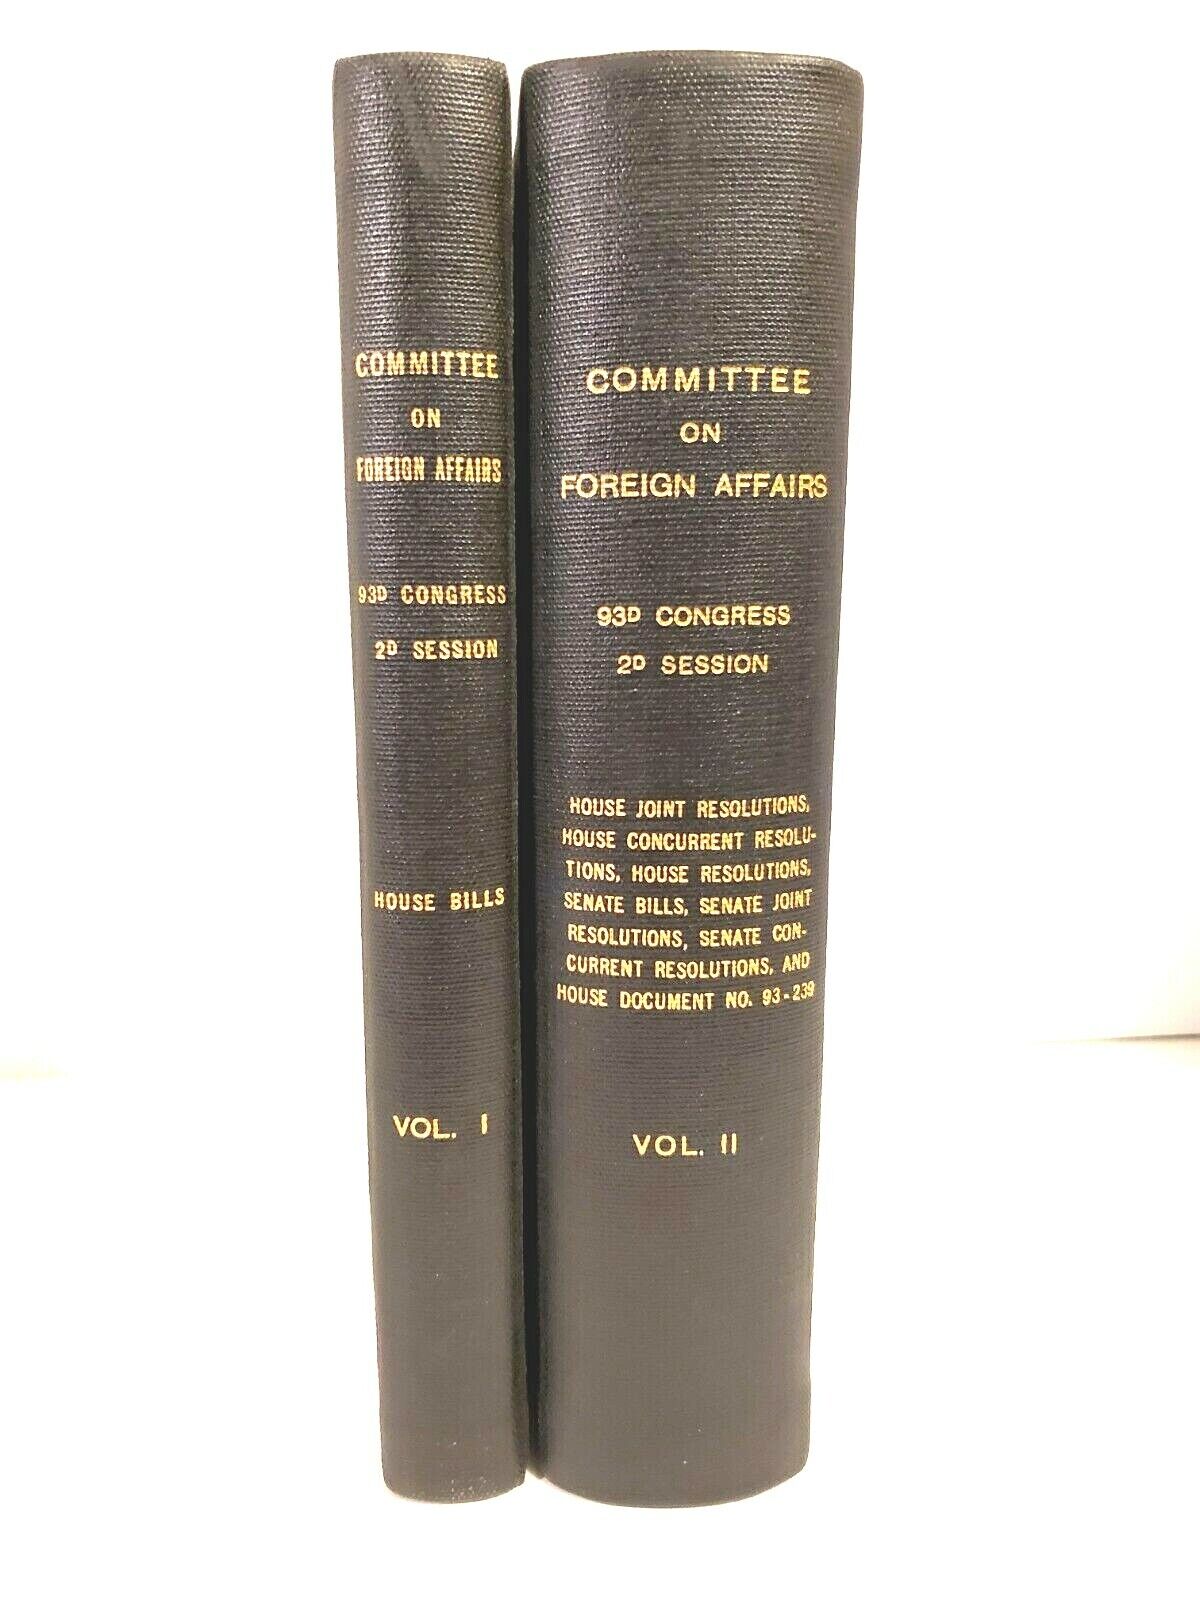 COMMITTEE ON FOREIGN AFFAIRS - HOUSE BILLS - 1974 - 2 VOL. SET - ENGRAVED - VG